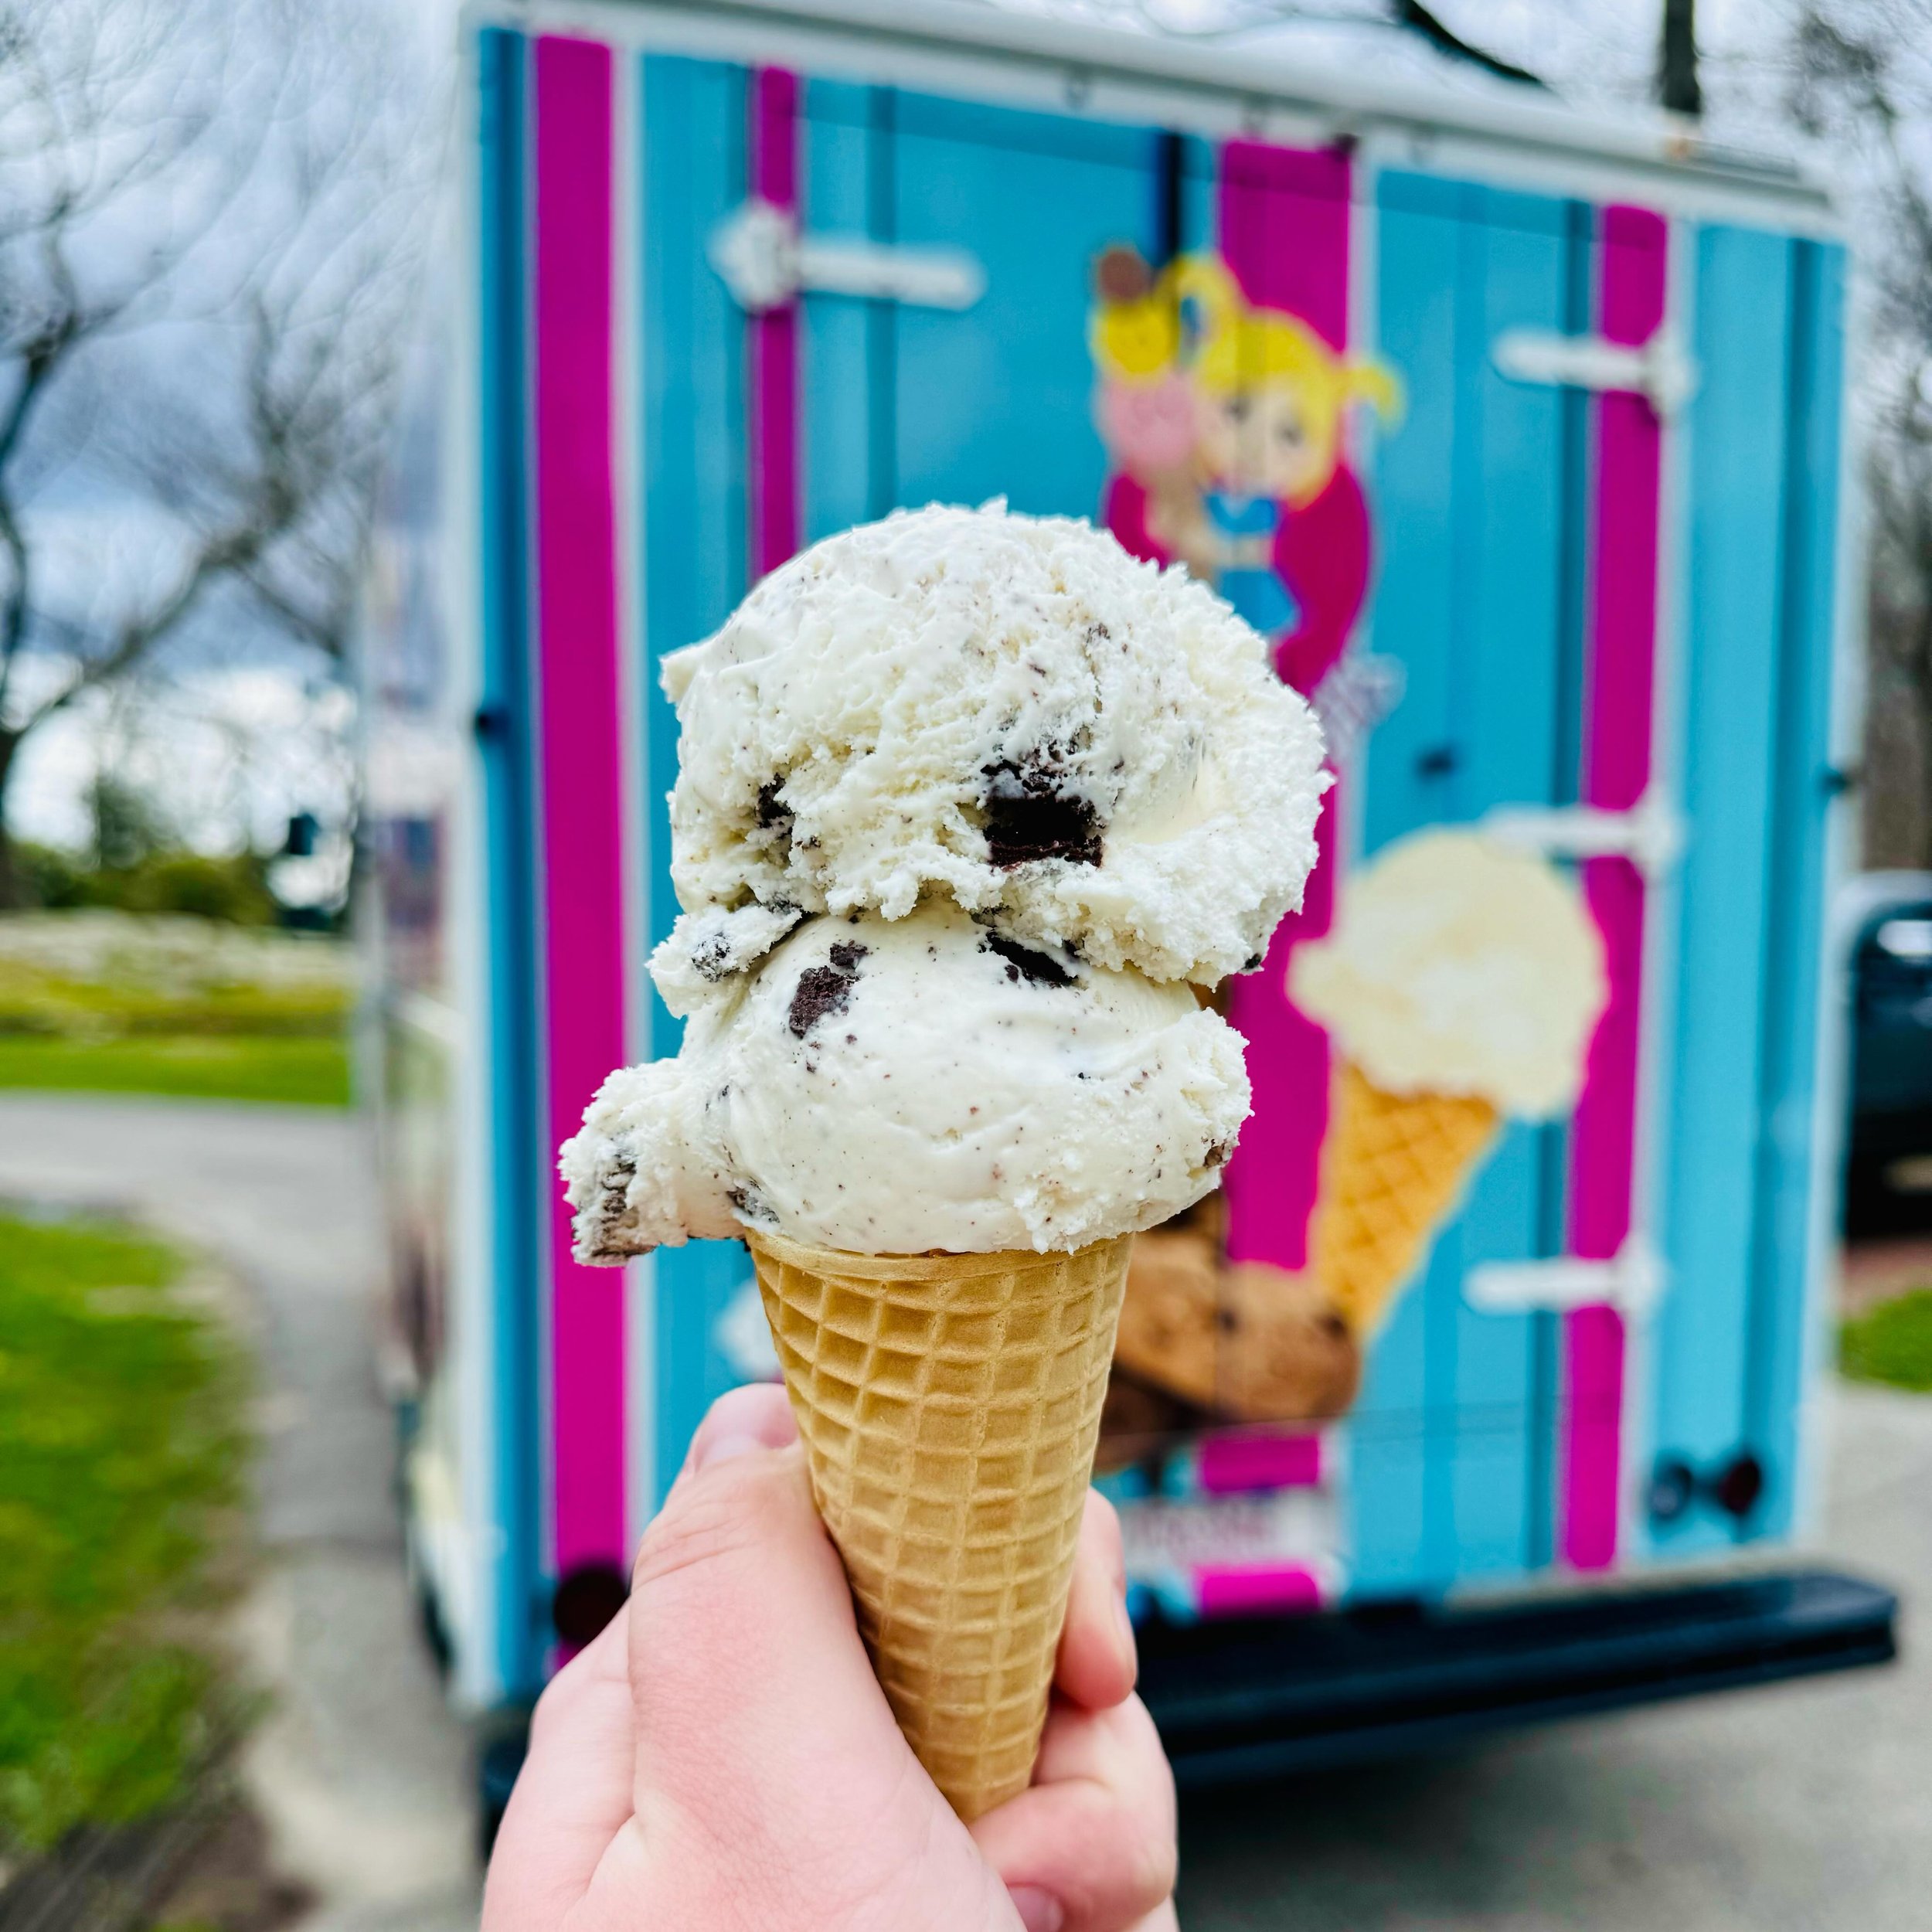 It&rsquo;s officially cone season! We are back!
👋 Come and find us this week:

Thursday 4/18
Food Truck Thursday
4:30-8pm
📍 65 Pottle Street, Kingston

Friday 4/19
Touch-A-Truck
10-12pm
📍 600 Longwater Drive, Norwell